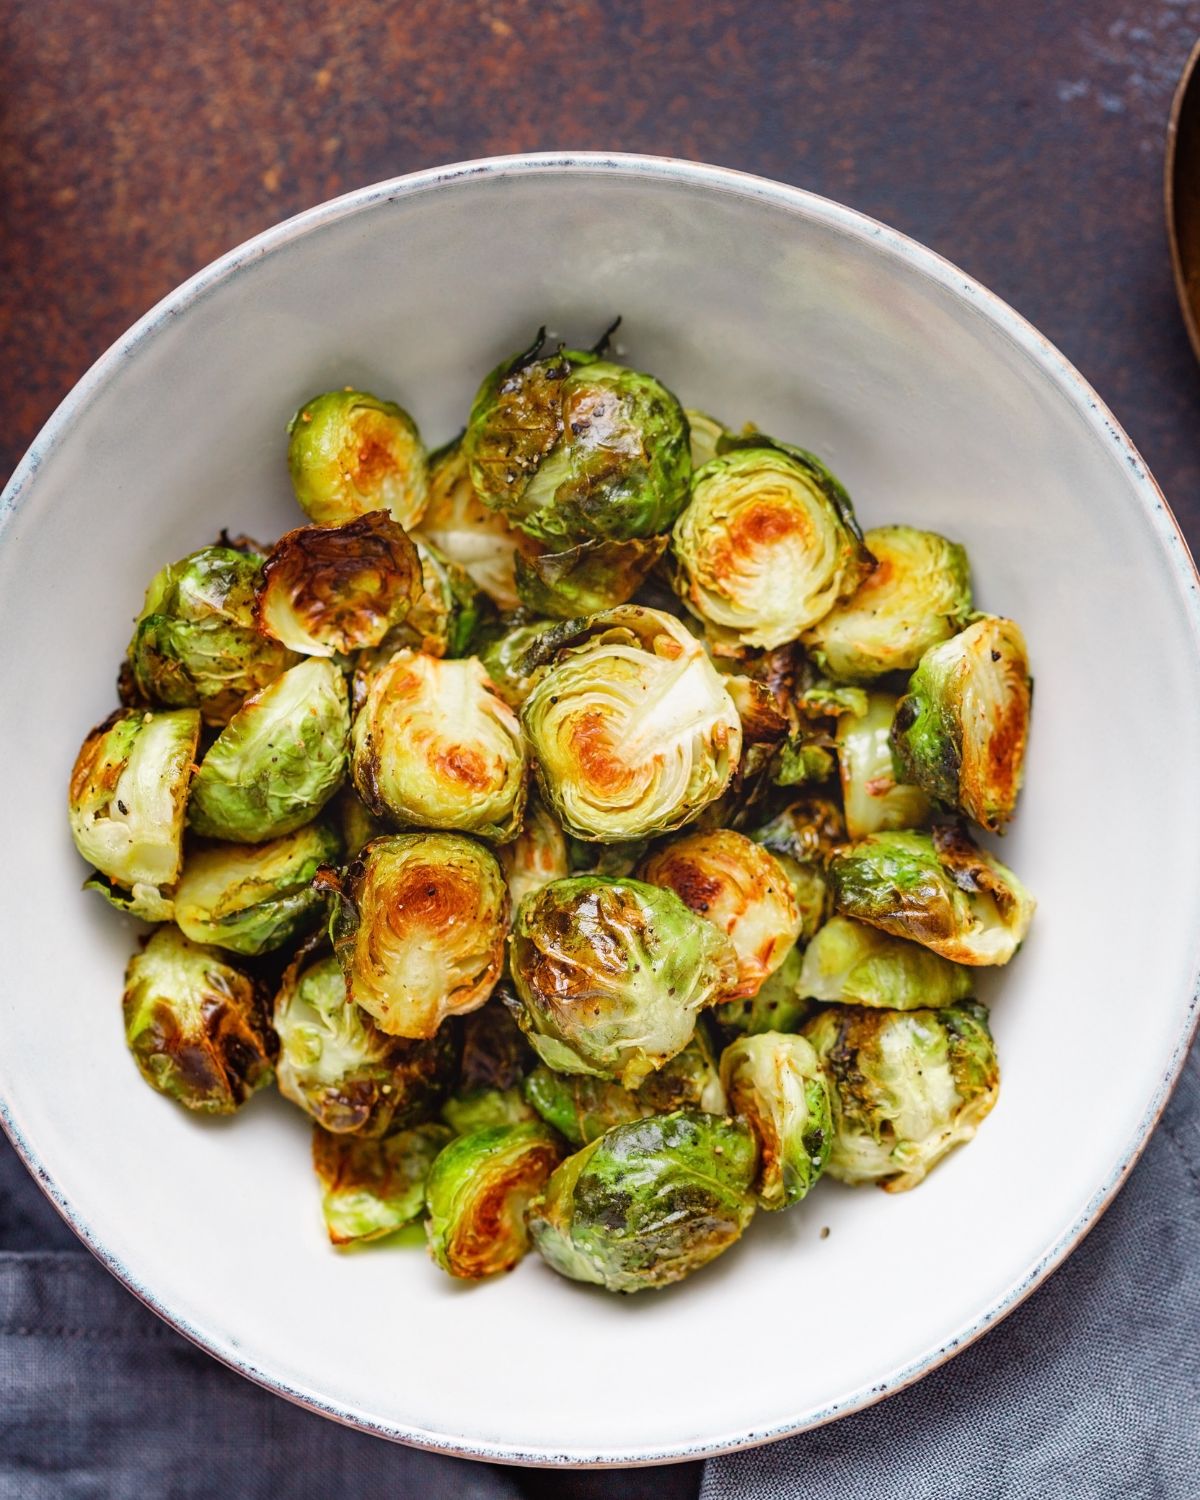 A bowl of the maple glazed brussels sprouts.